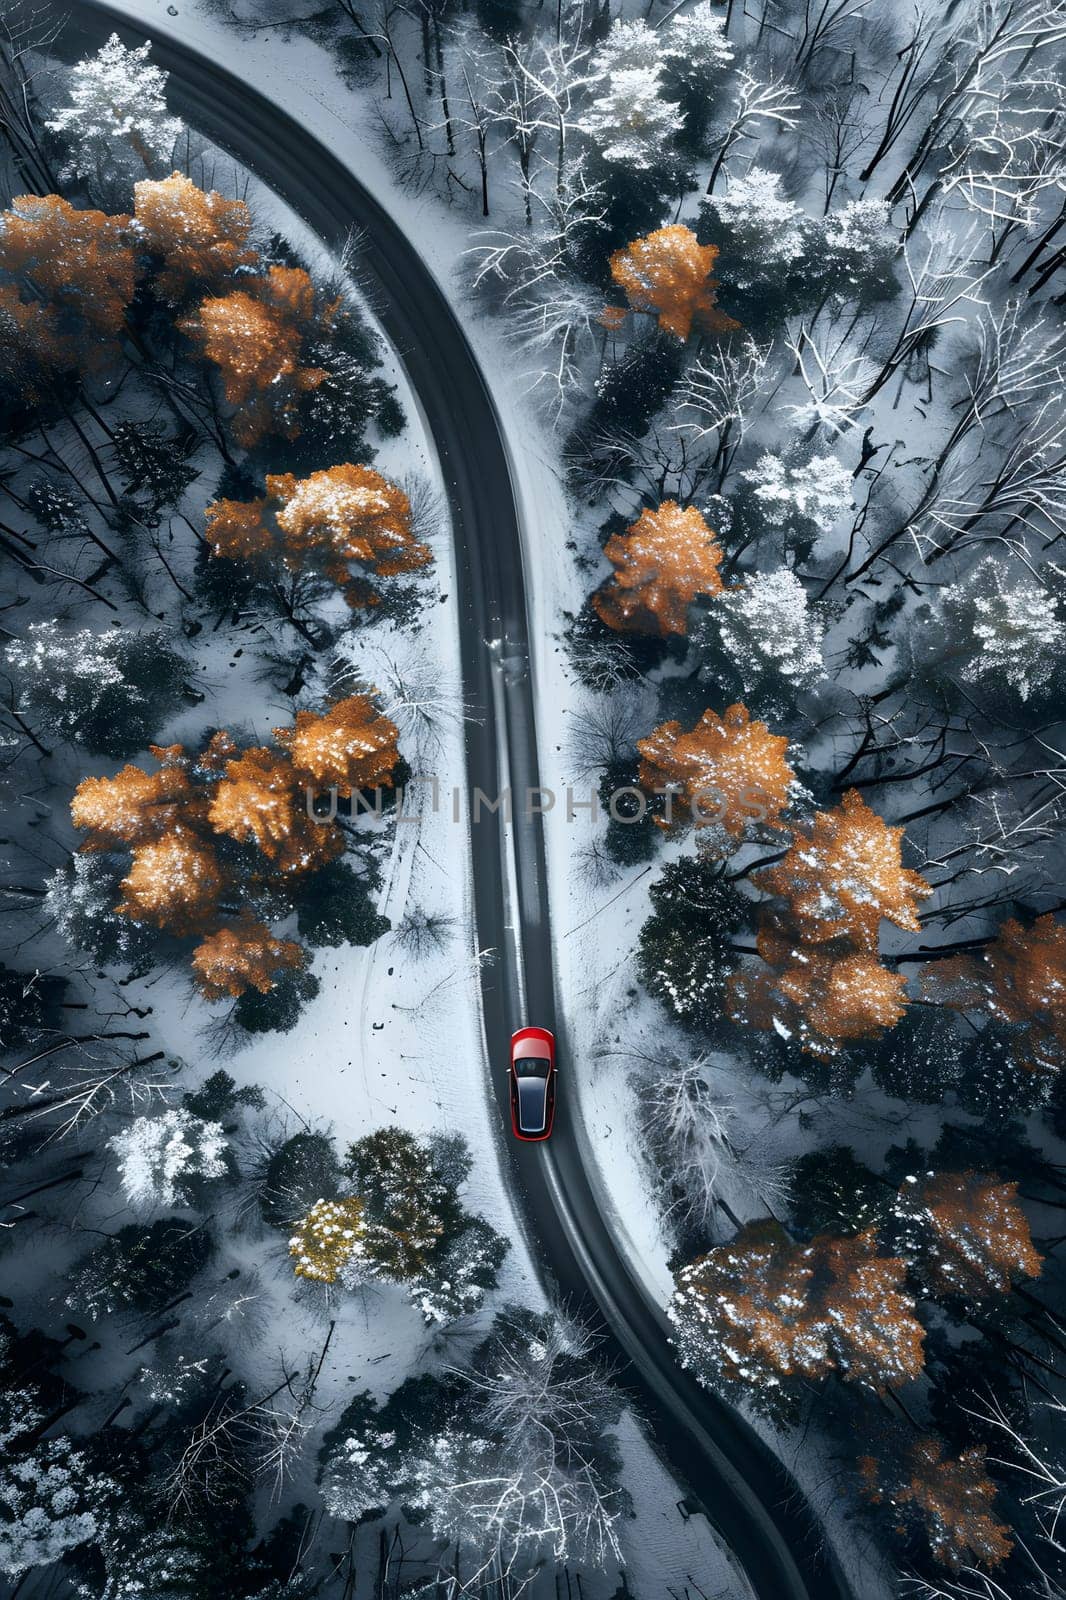 An aerial view of a car with automotive tire driving on a snowy road, passing by trees and plantcovered landscape